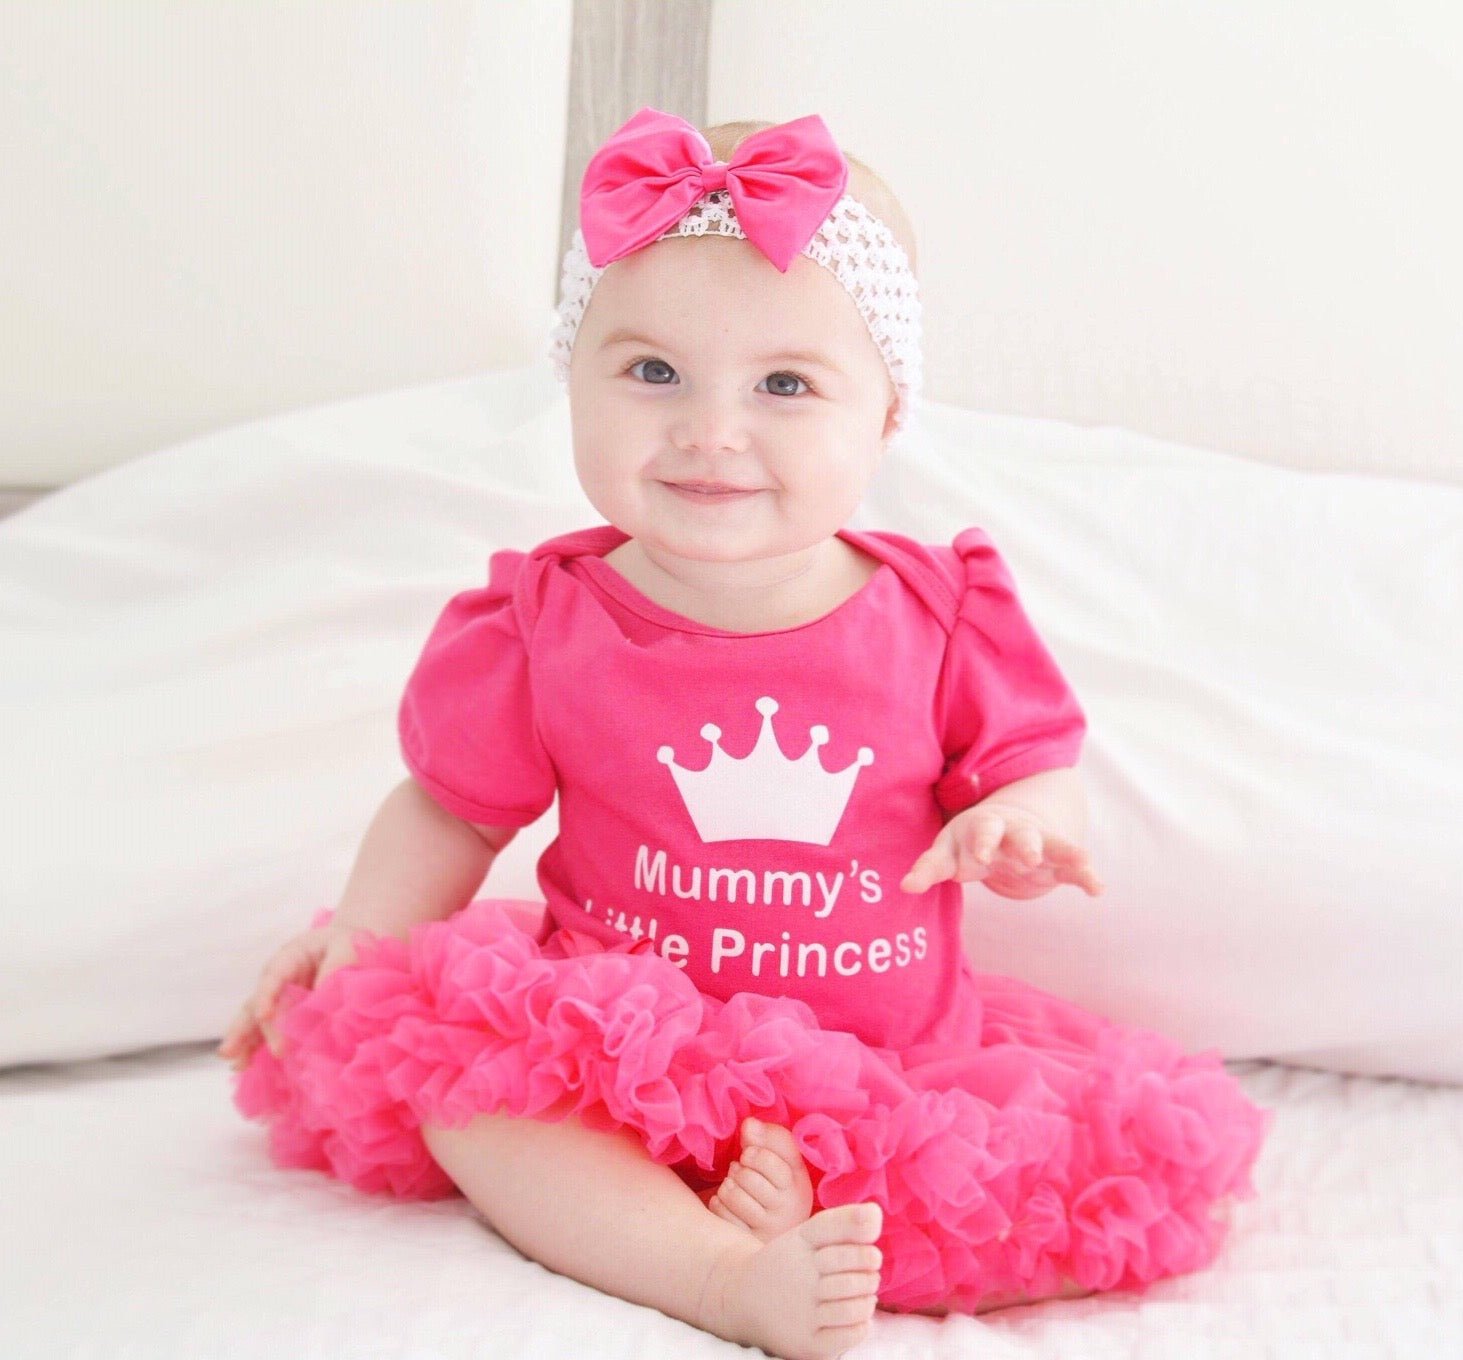 Baby Girl Coming Home Outfit Baby Girl Clothes Baby Girl Gift Newborn Girl  Coming Home Outfit Newborn Girl Clothes Baby Girl Tutu 